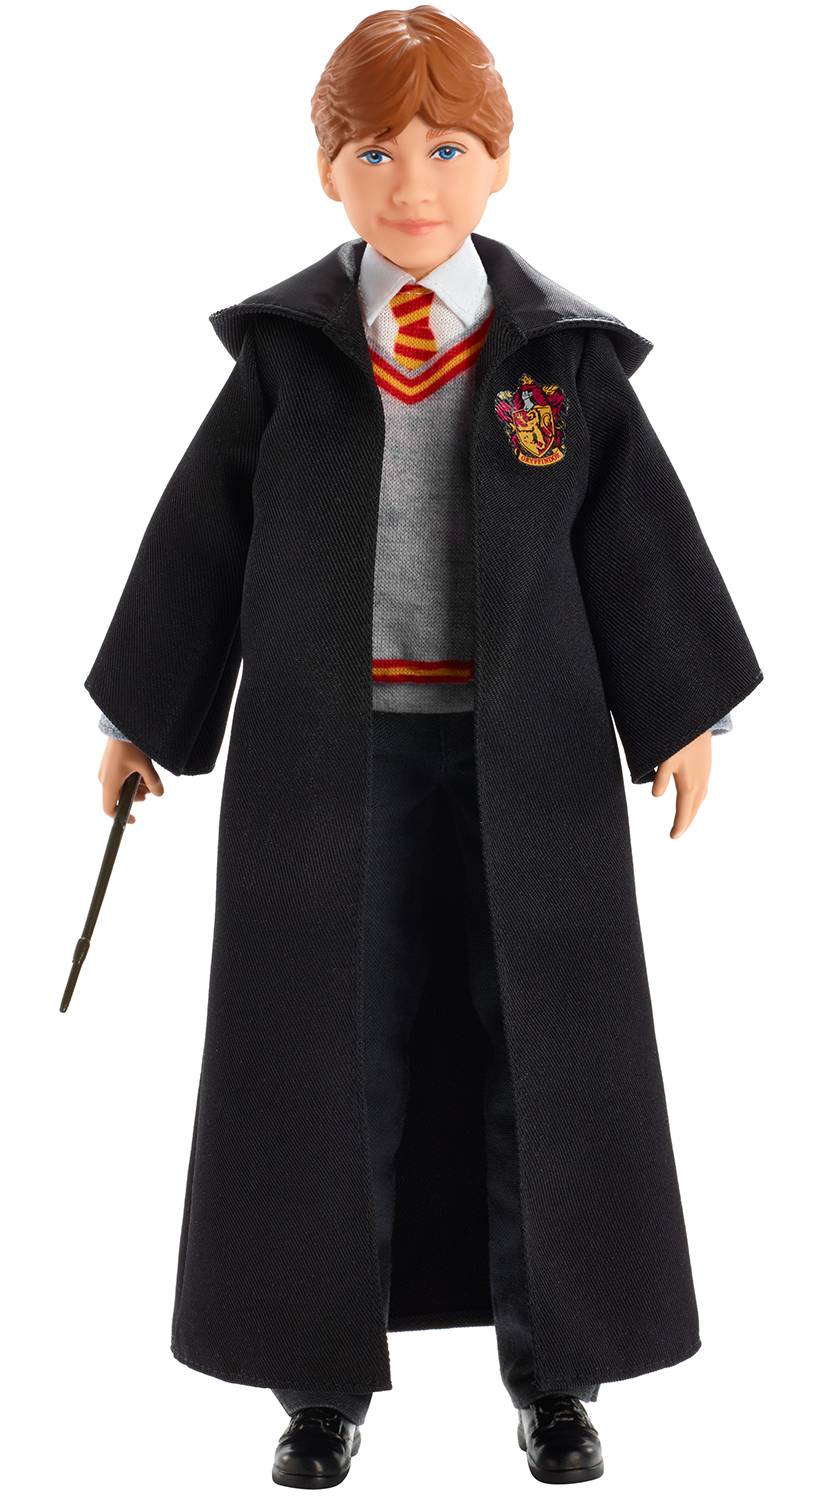 HARRY POTTER COS 7IN SCALE RON WEASLEY DOLL